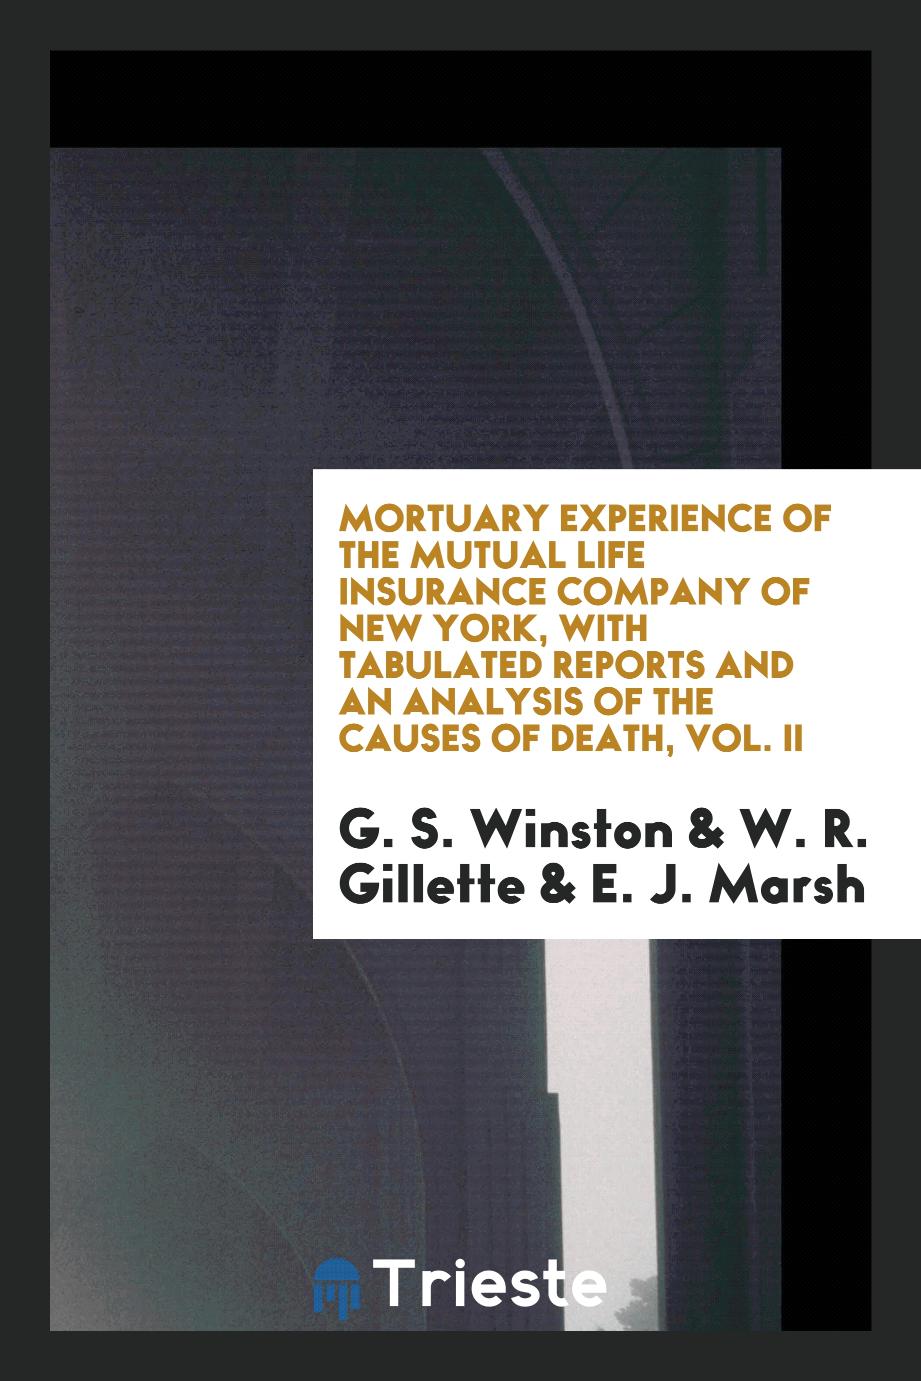 Mortuary Experience of the Mutual Life Insurance Company of New York, with Tabulated Reports and an Analysis of the Causes of Death, Vol. II